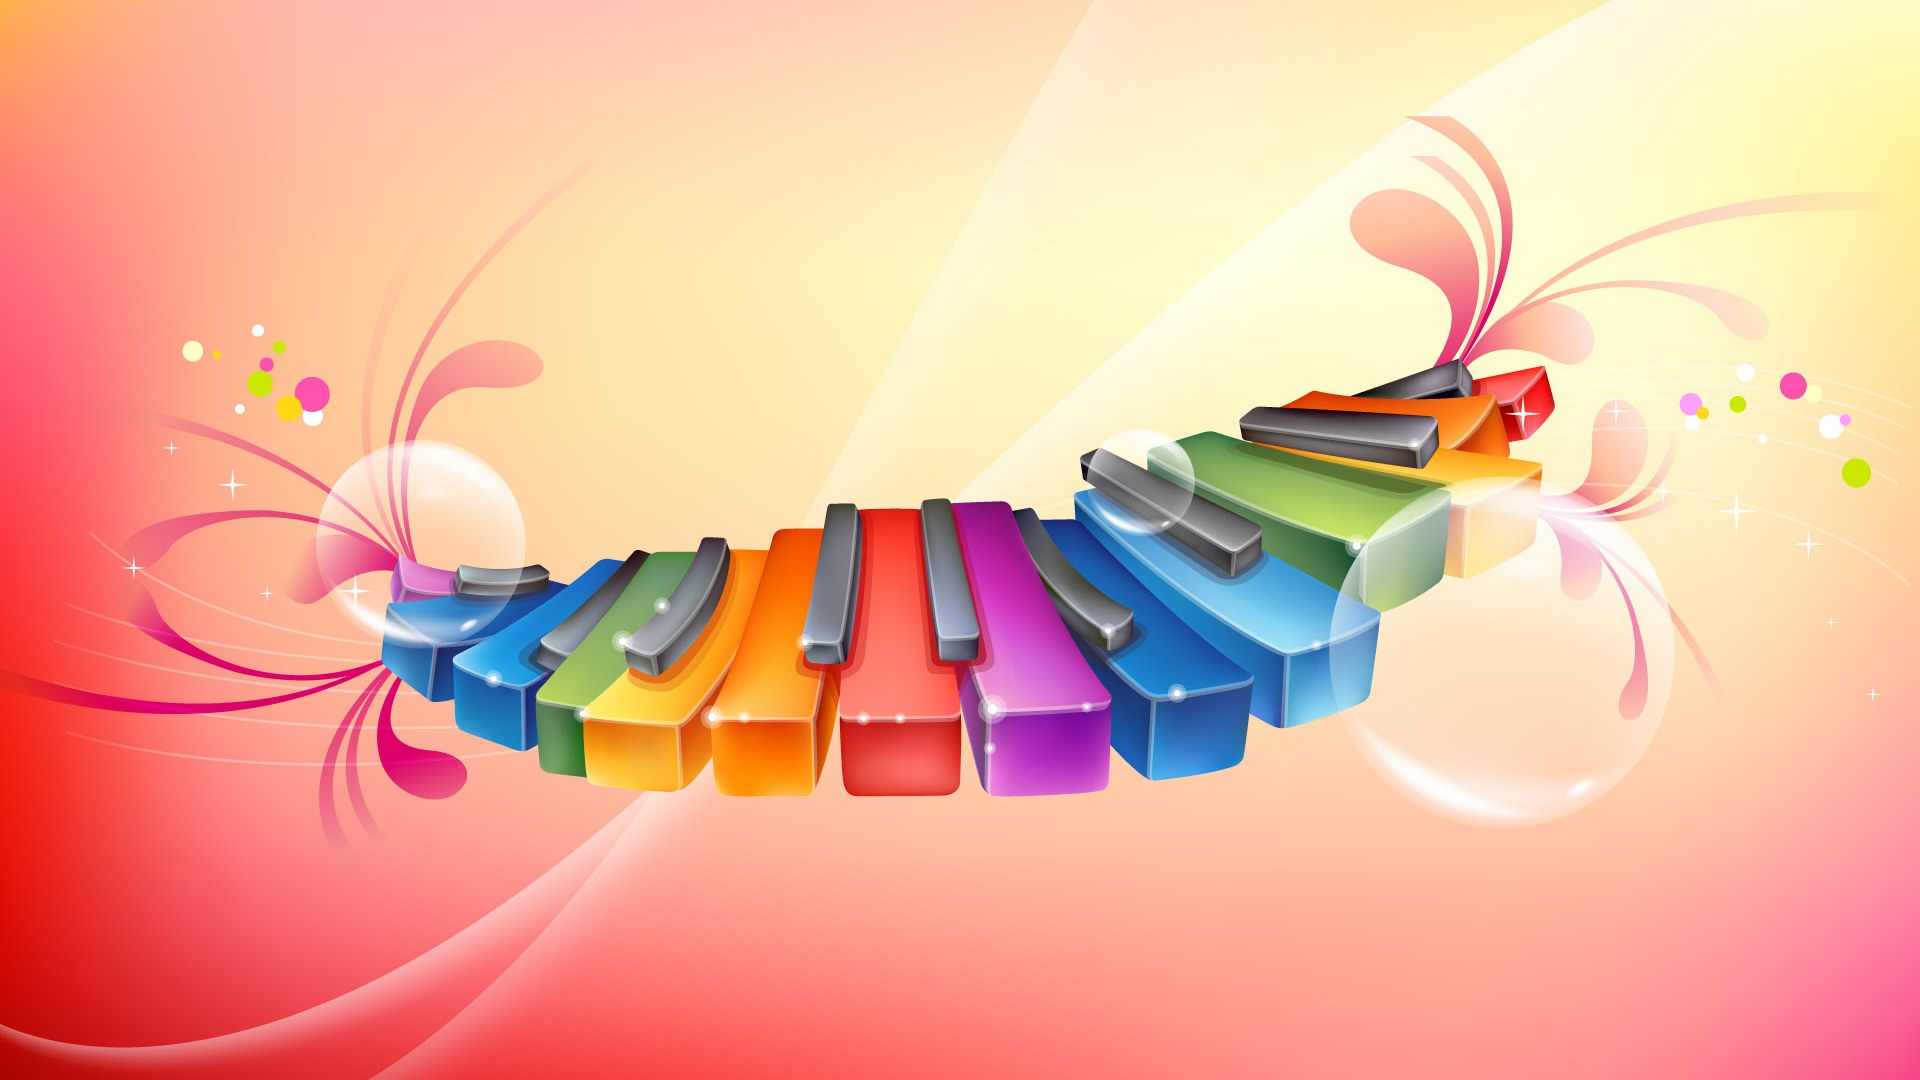 Xylophone, High Definition, High Quality, Widescreen